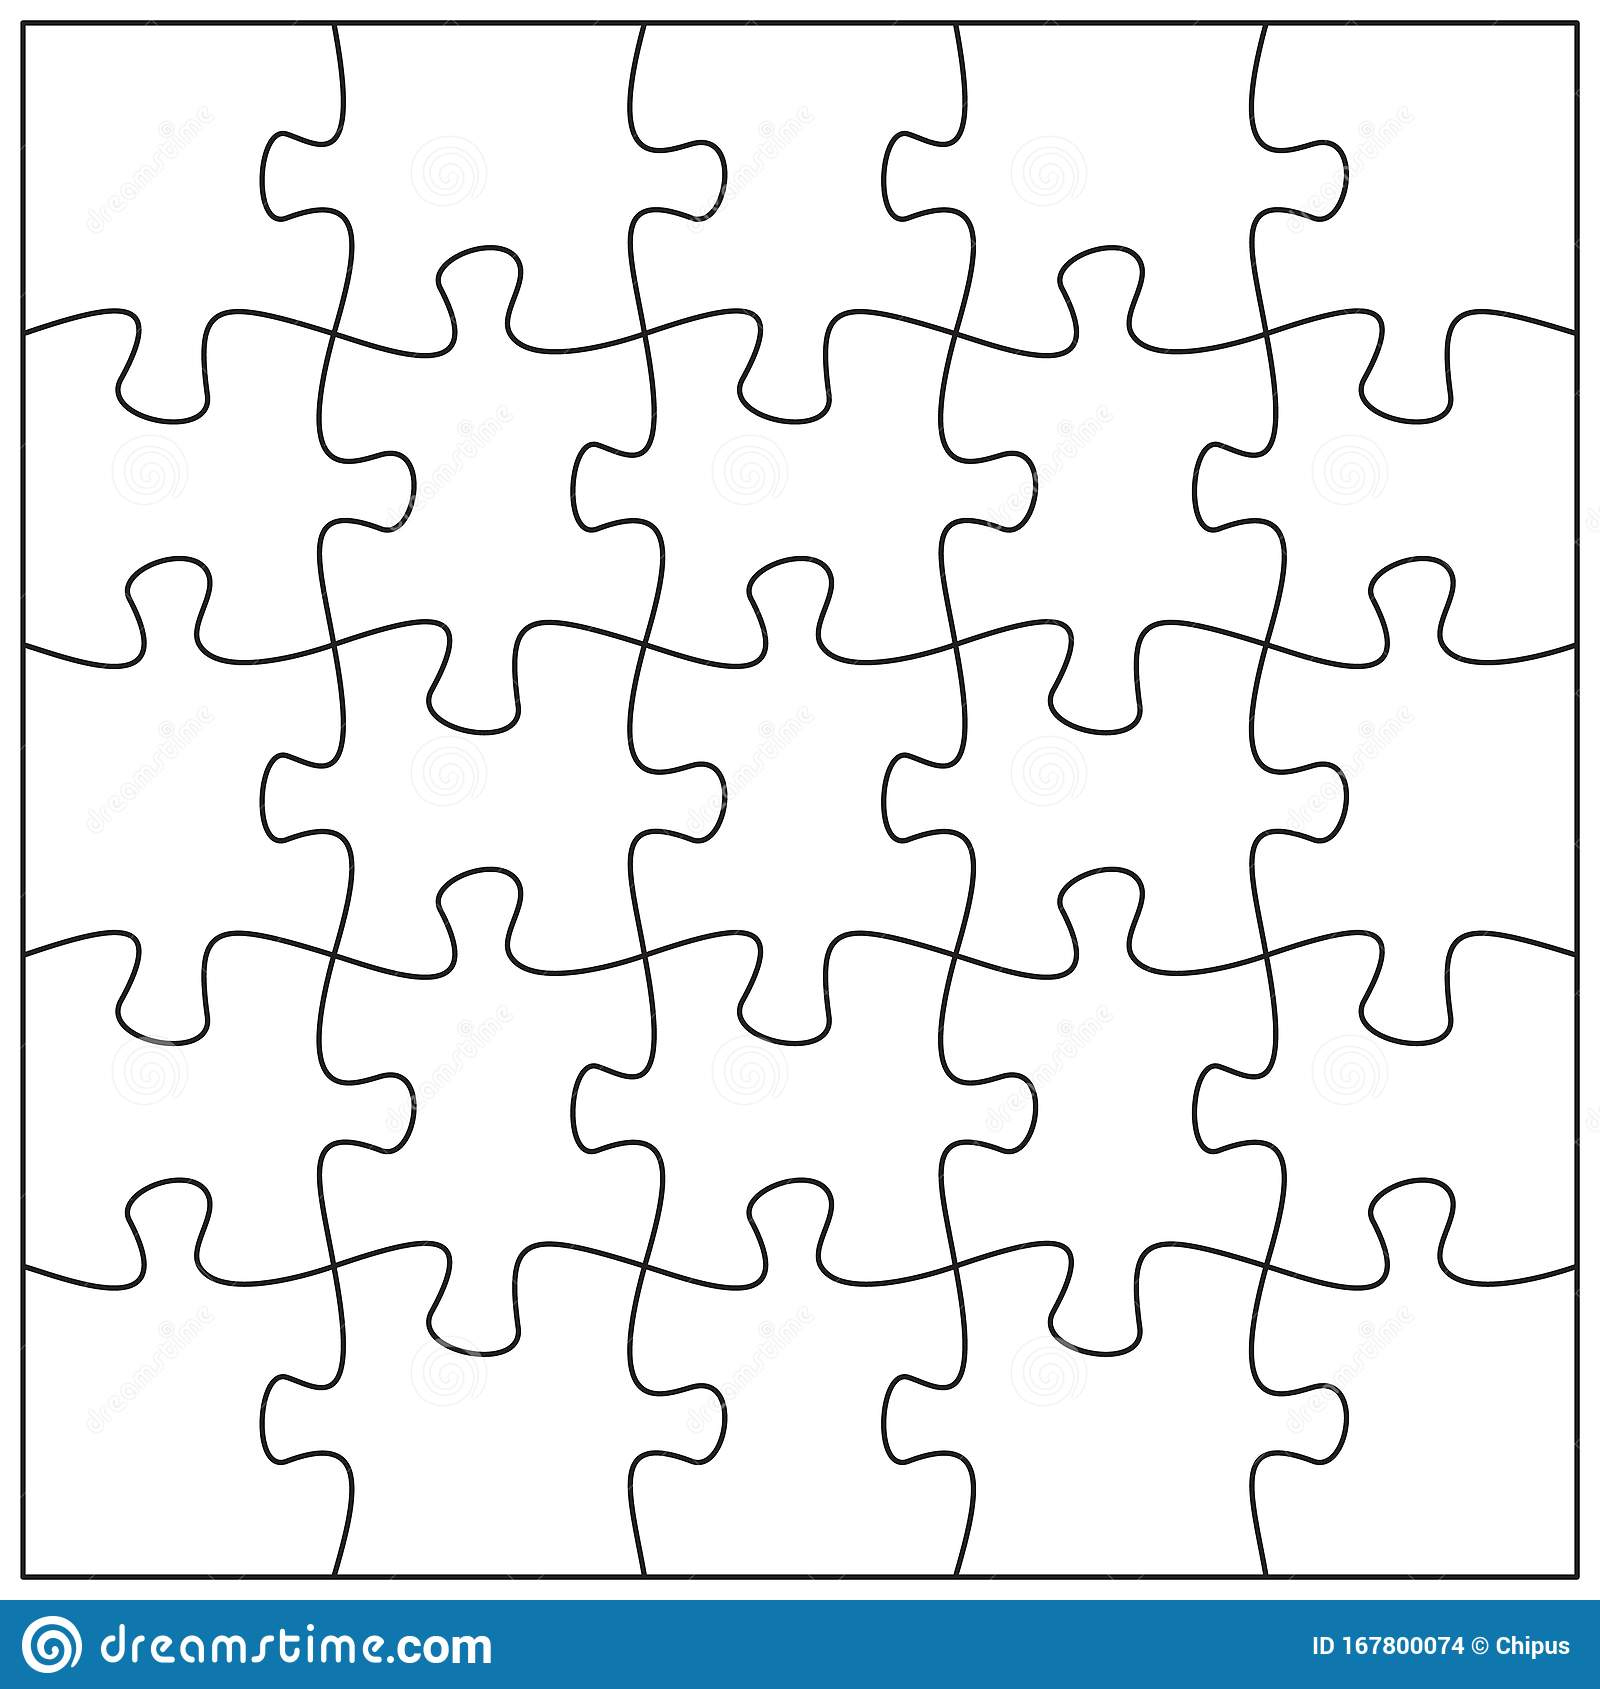 20 Jigsaw Pieces Template. Twenty Puzzle Pieces Connected with regard to Blank Jigsaw Piece Template